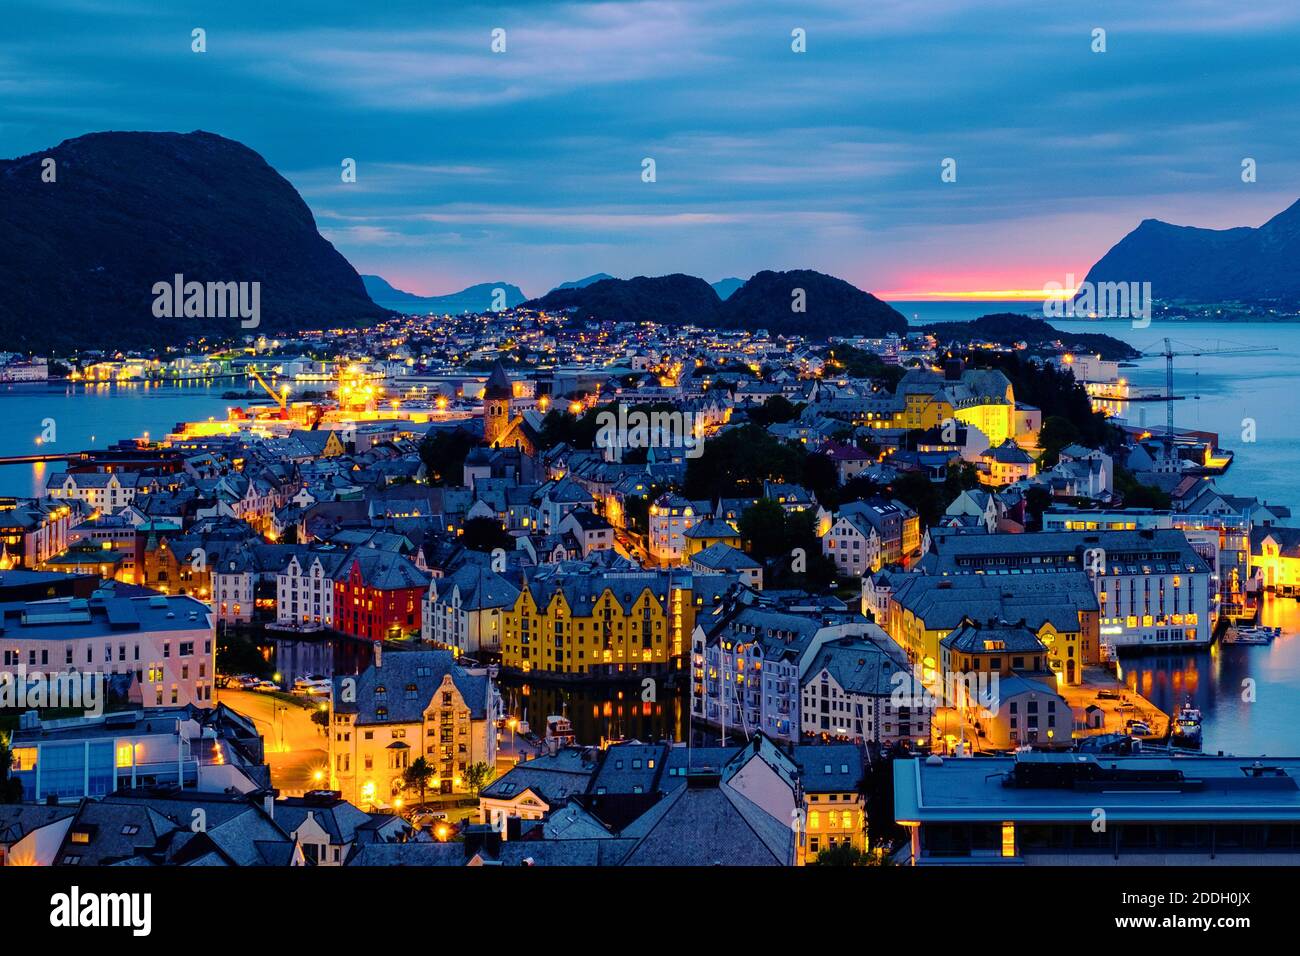 Alesund, Norway. Aerial view of Alesund, Norway at sunset. Colorful night sky over famous touristic destination with port and mountains Stock Photo